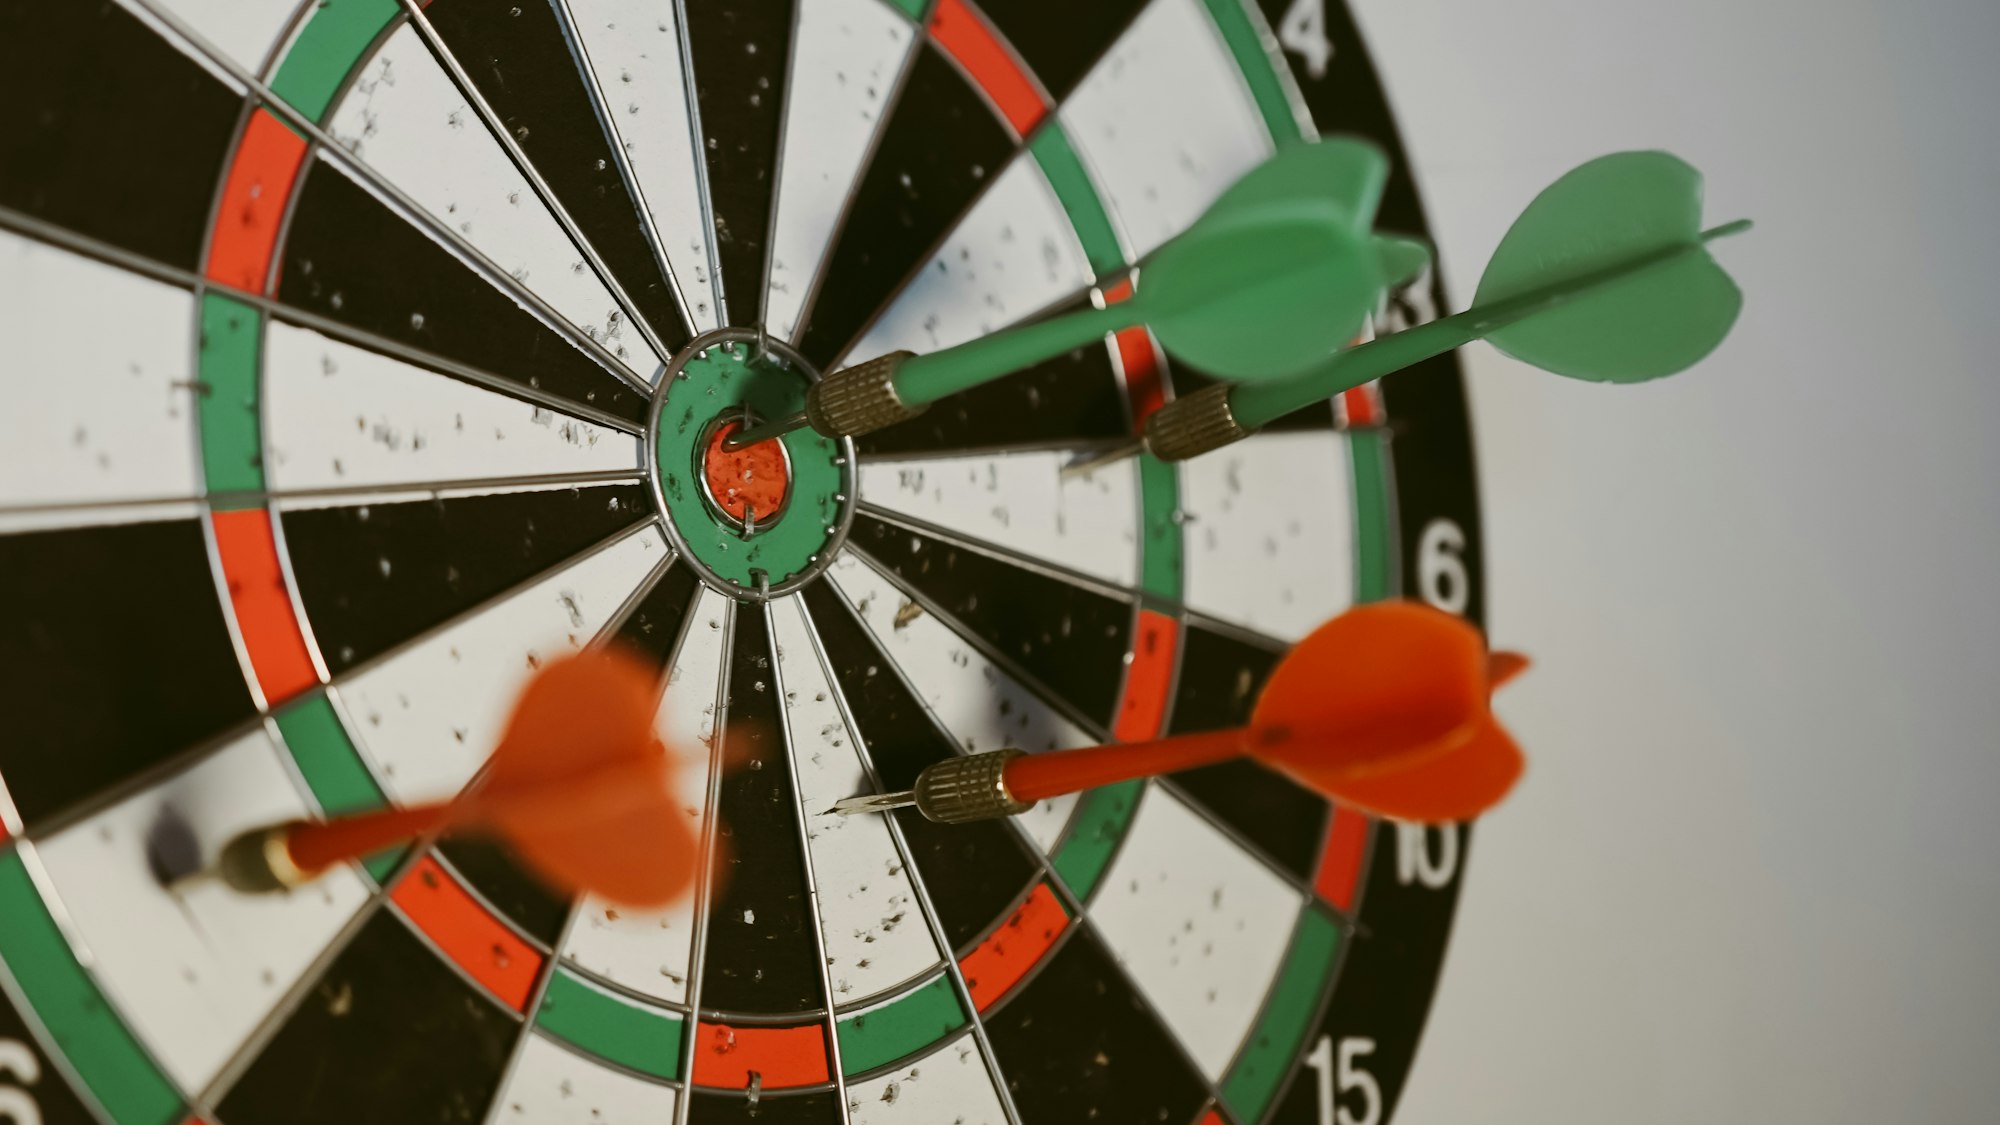 Success hitting target aim goal achievement concept background - three darts in bull's eye close up. red three darts arrows in the target center business goal concept